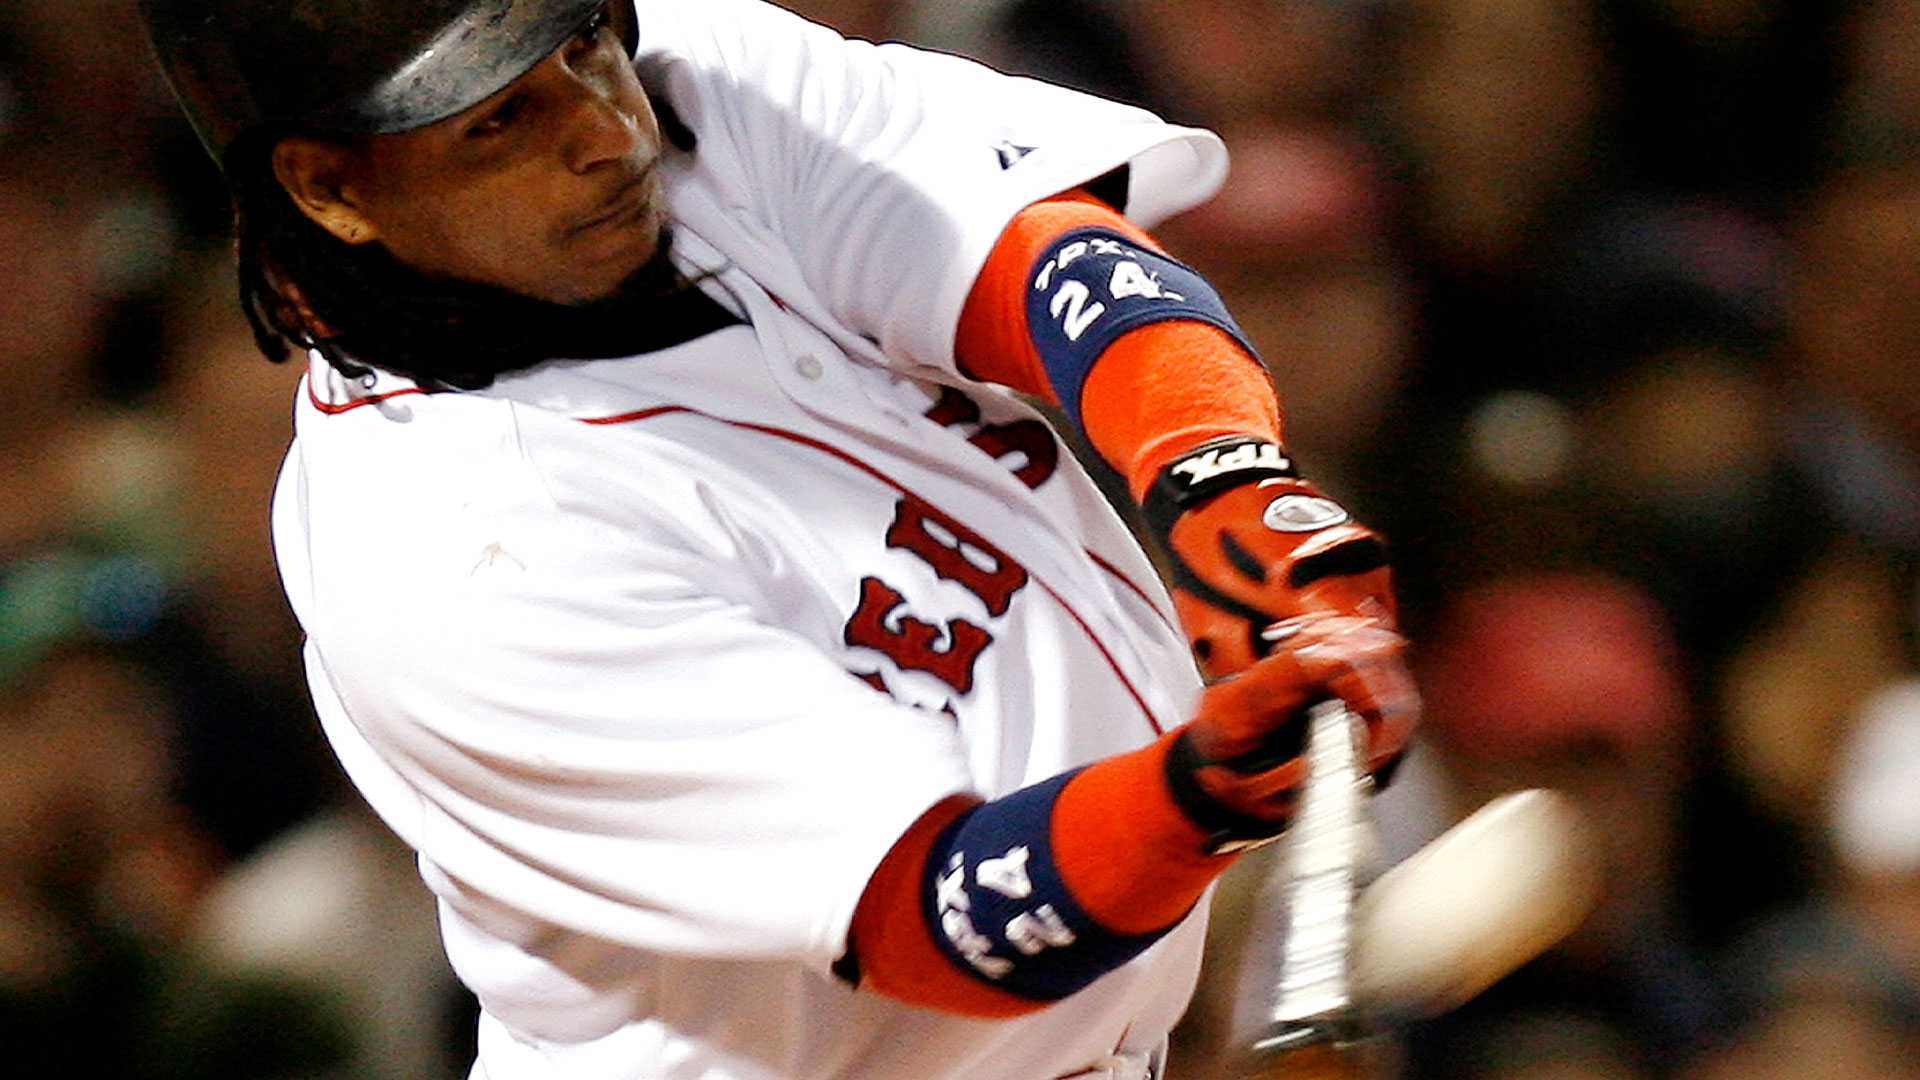 After missing Red Sox Hall of Fame induction, Manny Ramirez